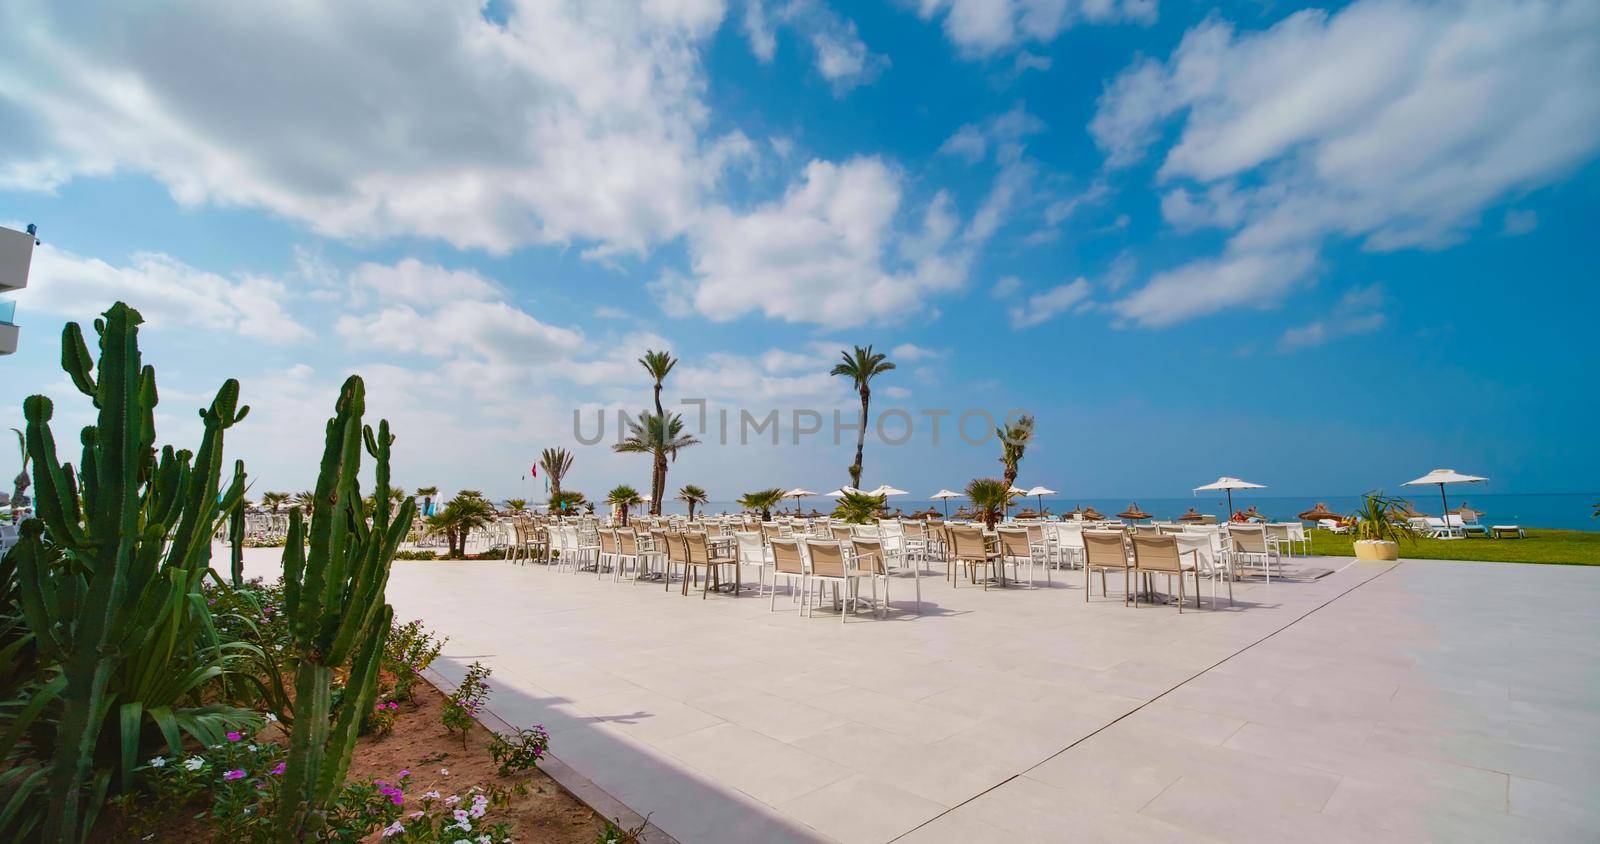 Tunisia, 2022: View of luxury terrace on a tropical beach in Tunisia, Africa. Beautiful garden on a luxury hotel, palm trees on seaside. Resort overlooking the Mediterranean Sea.